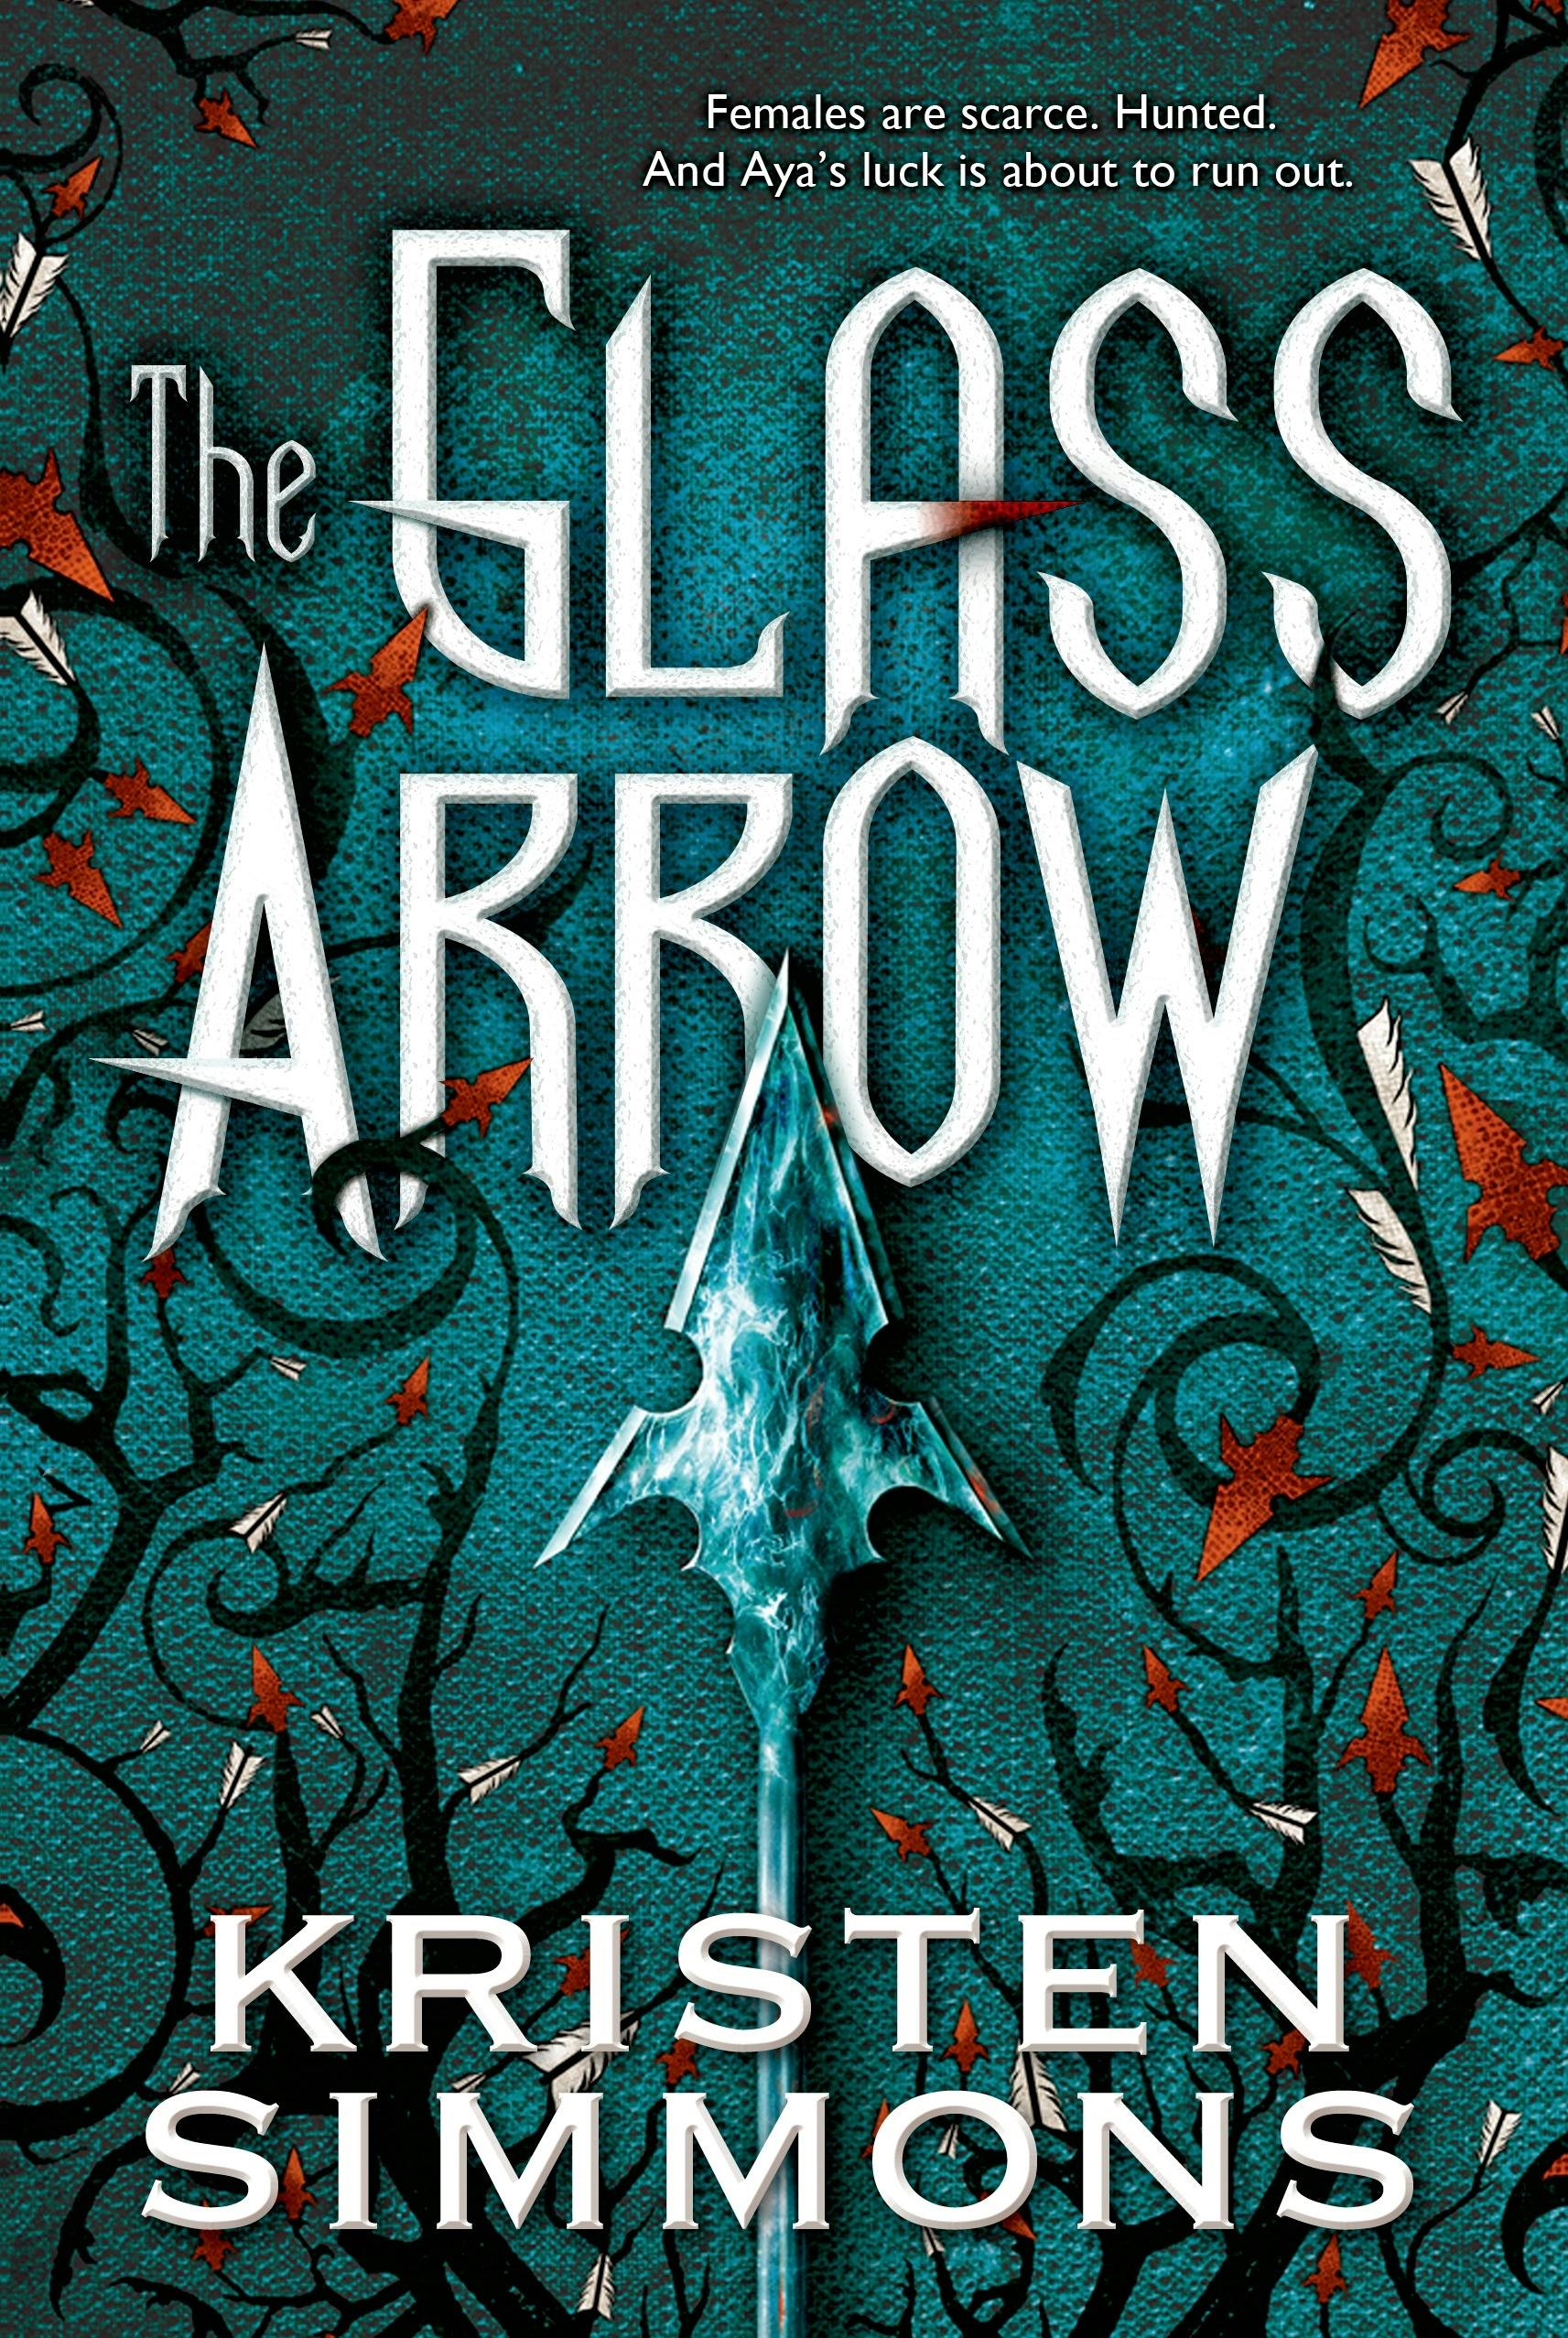 Cover for the book titled as: The Glass Arrow